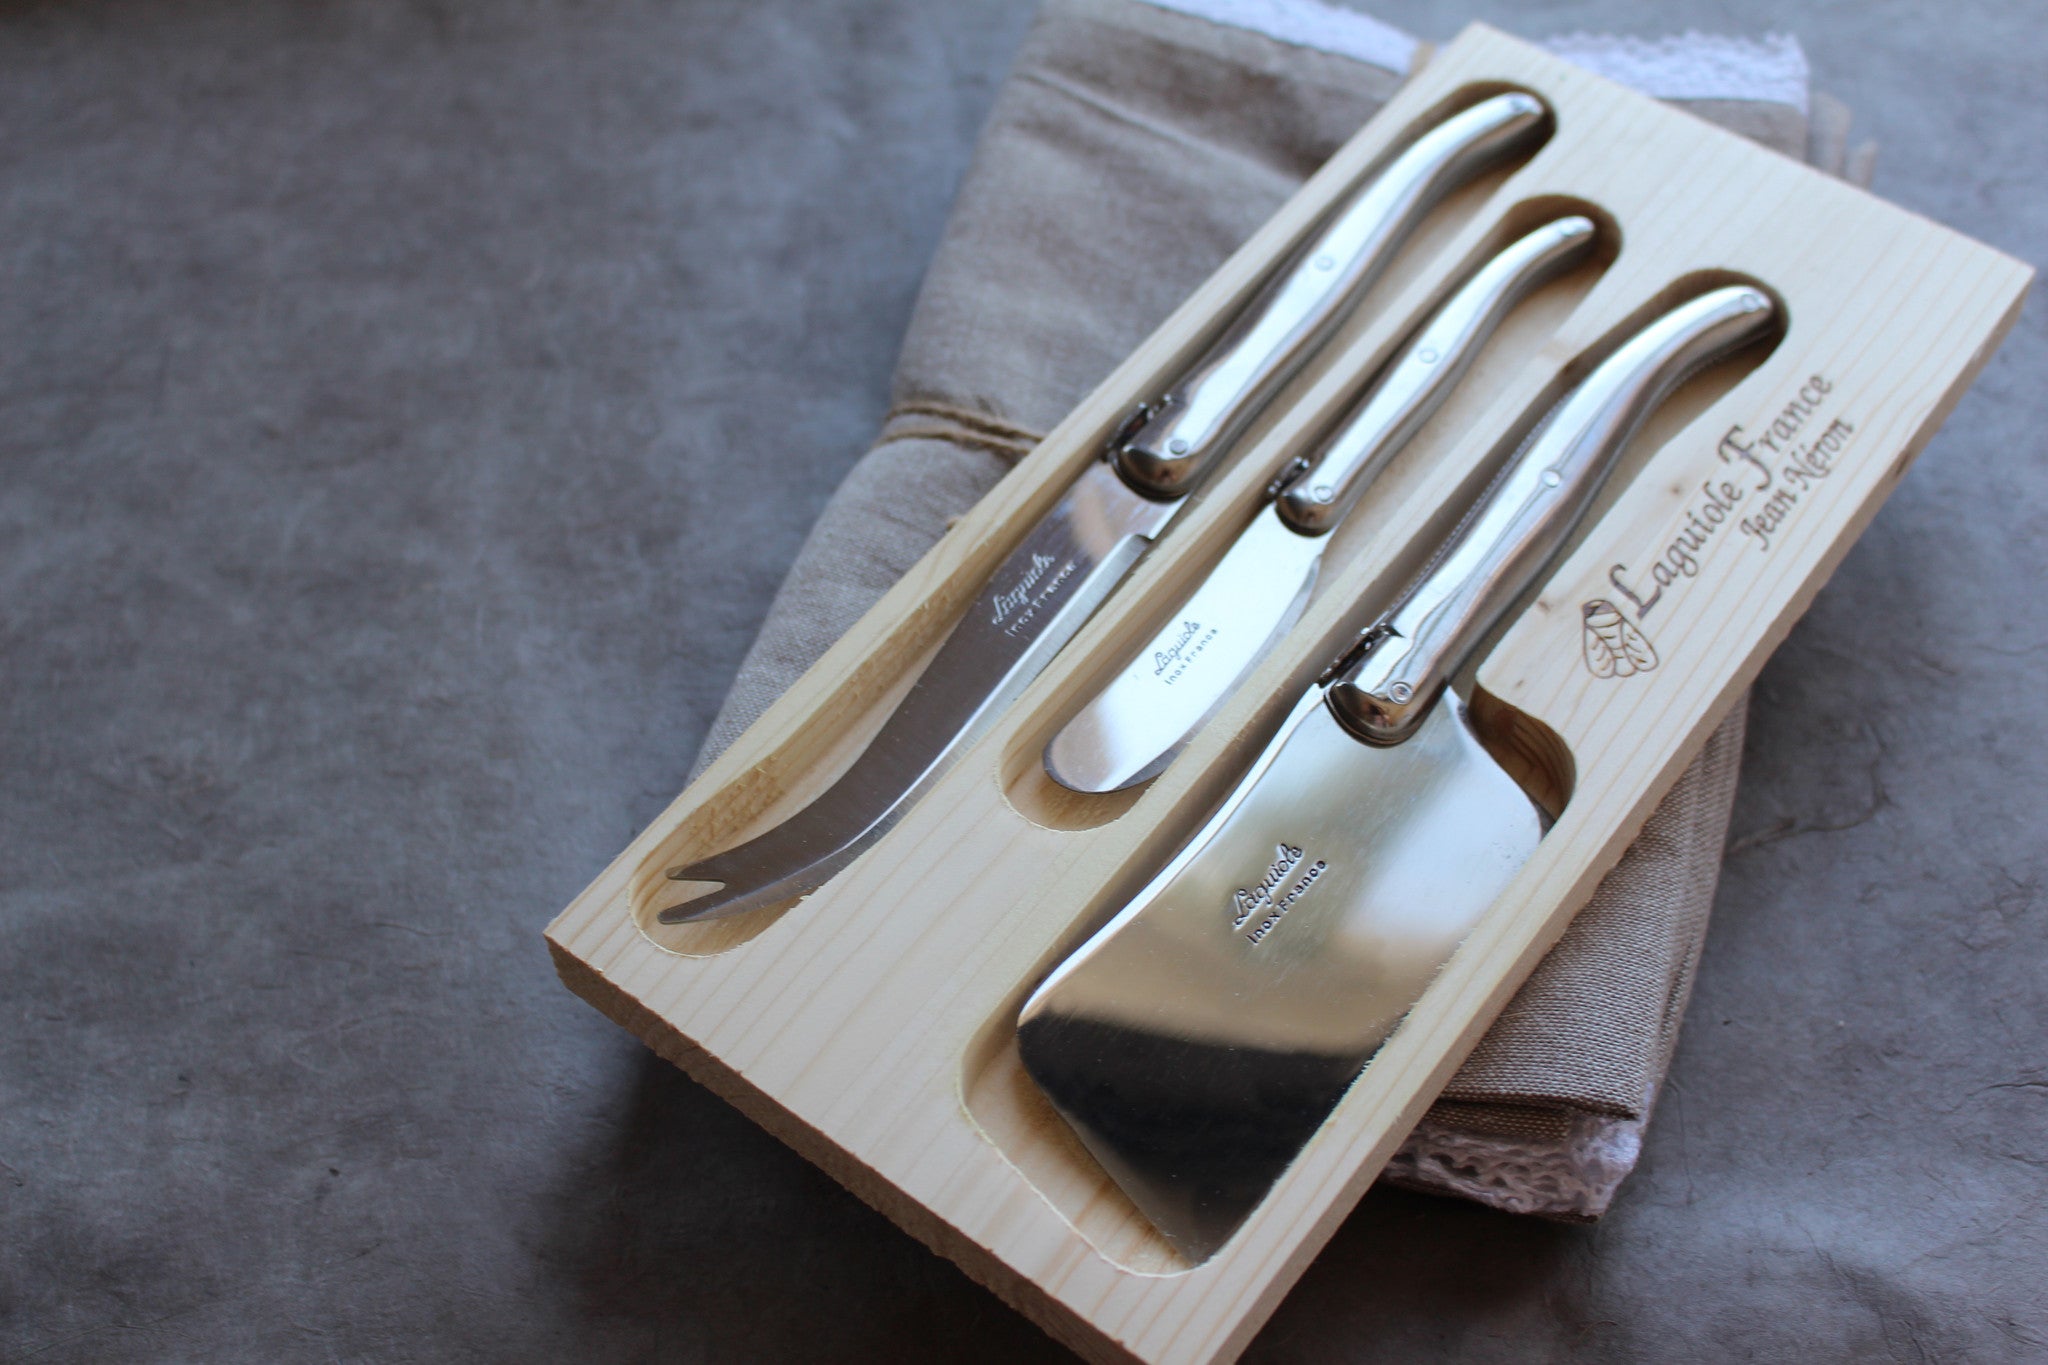 Laguiole Stainless Steel Platine Large Cheese Set in Wood Box with Acrylic Lid (Set of 3) Cutlery Set Laguiole Brand_Laguiole Cheese Sets Kitchen_Dinnerware Kitchen_Kitchenware Laguiole Loose Mini Rainbow Utensils Stainless_Steel_Platine_Cheese_Set_Large